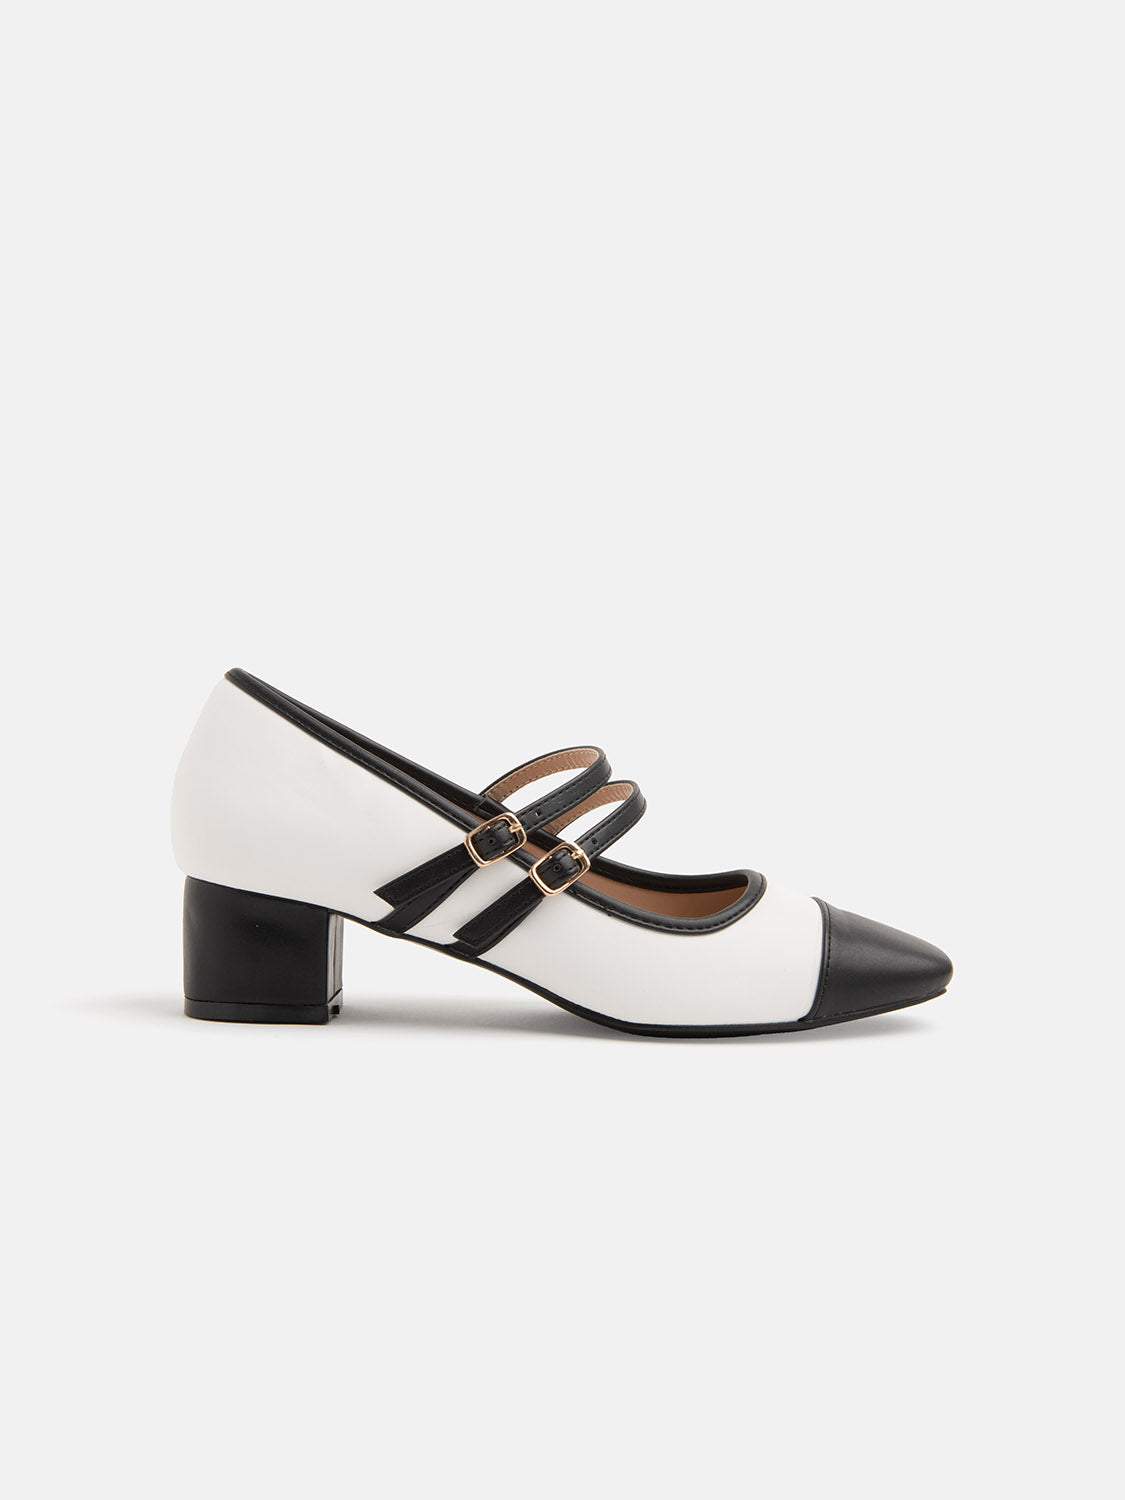 Mary jane with contrasting tip and double strap - BLACK AND WHITE